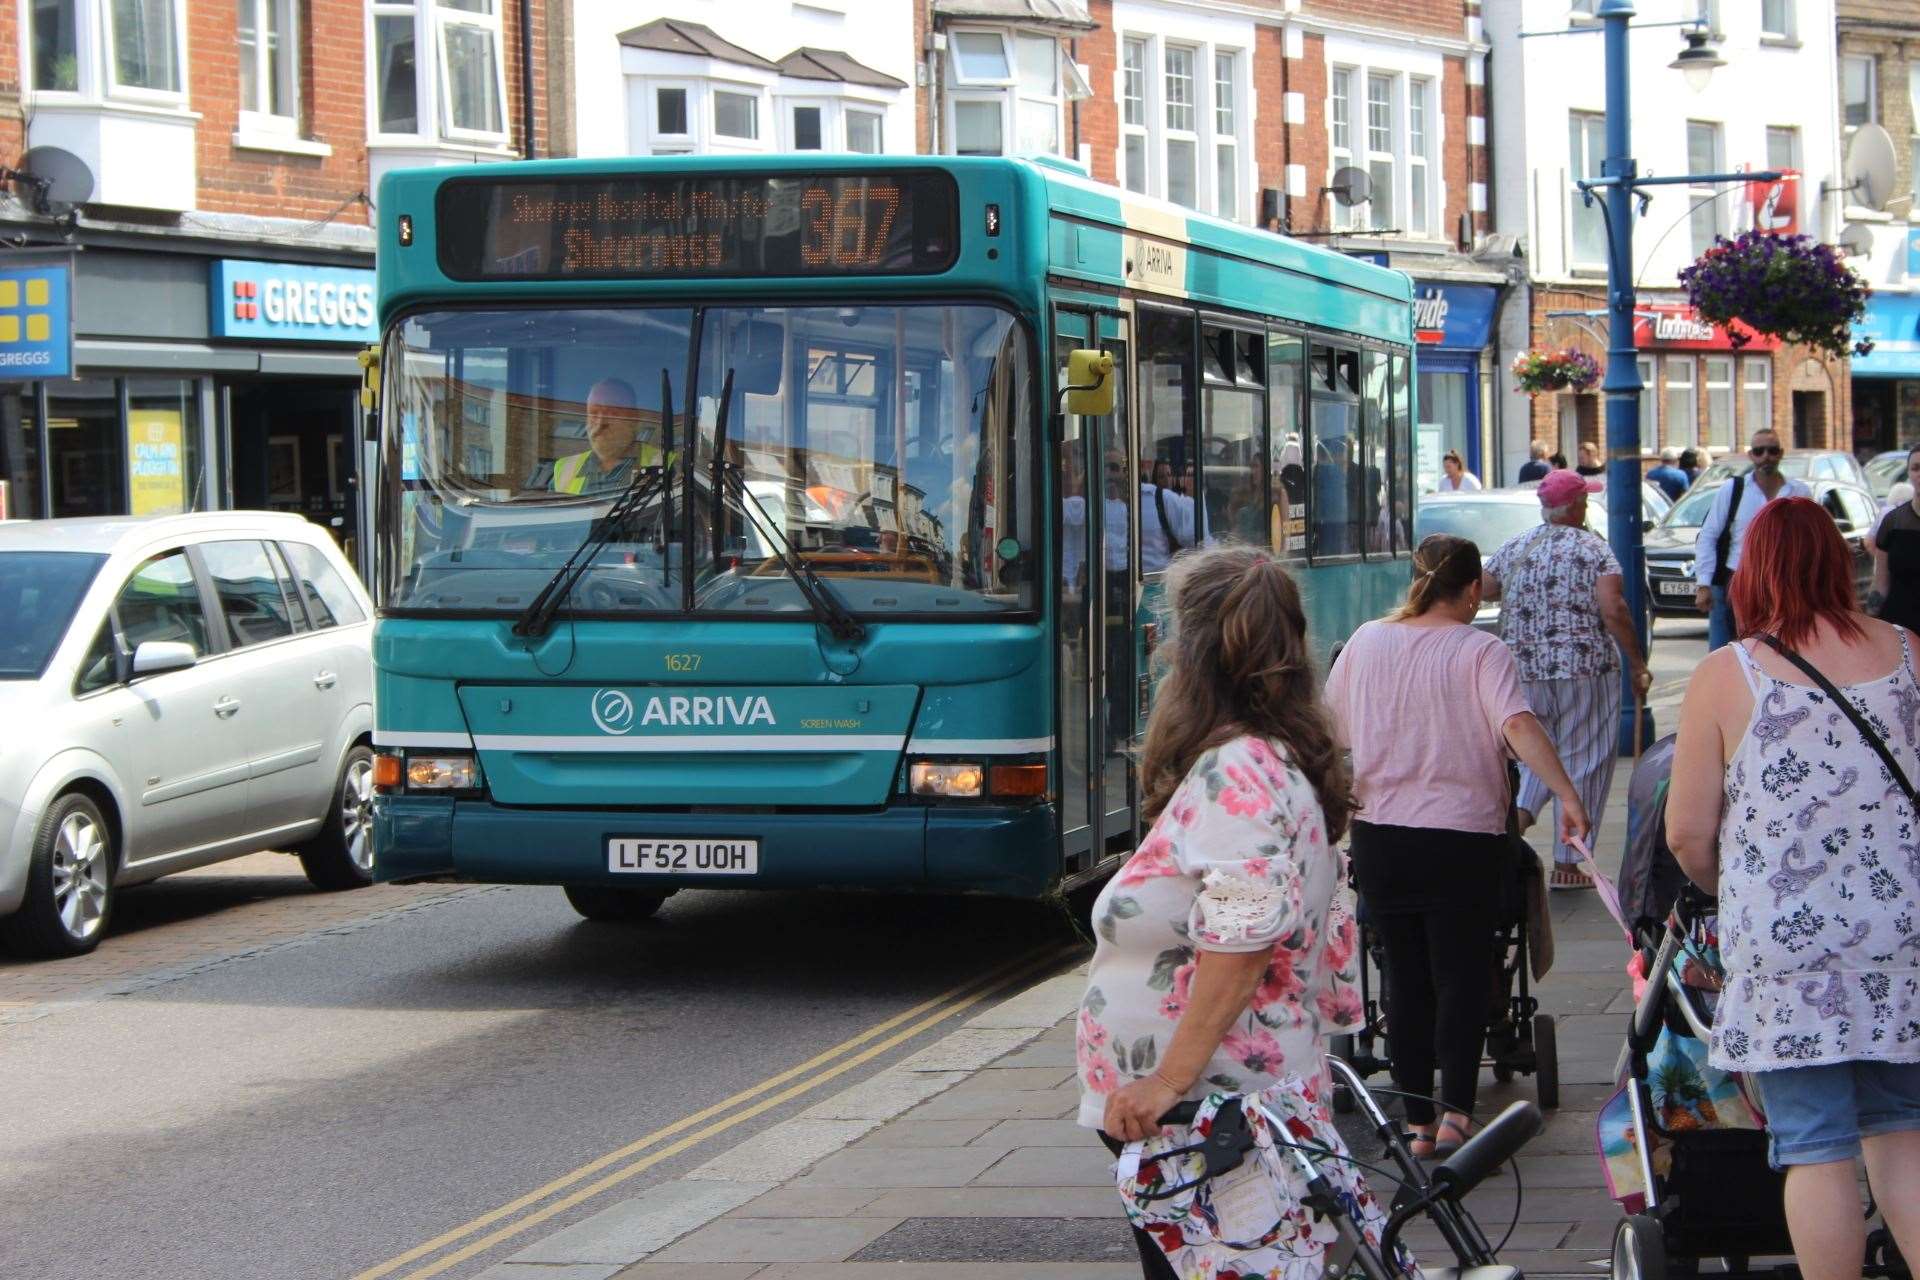 An Arriva bus in Sheerness High Street